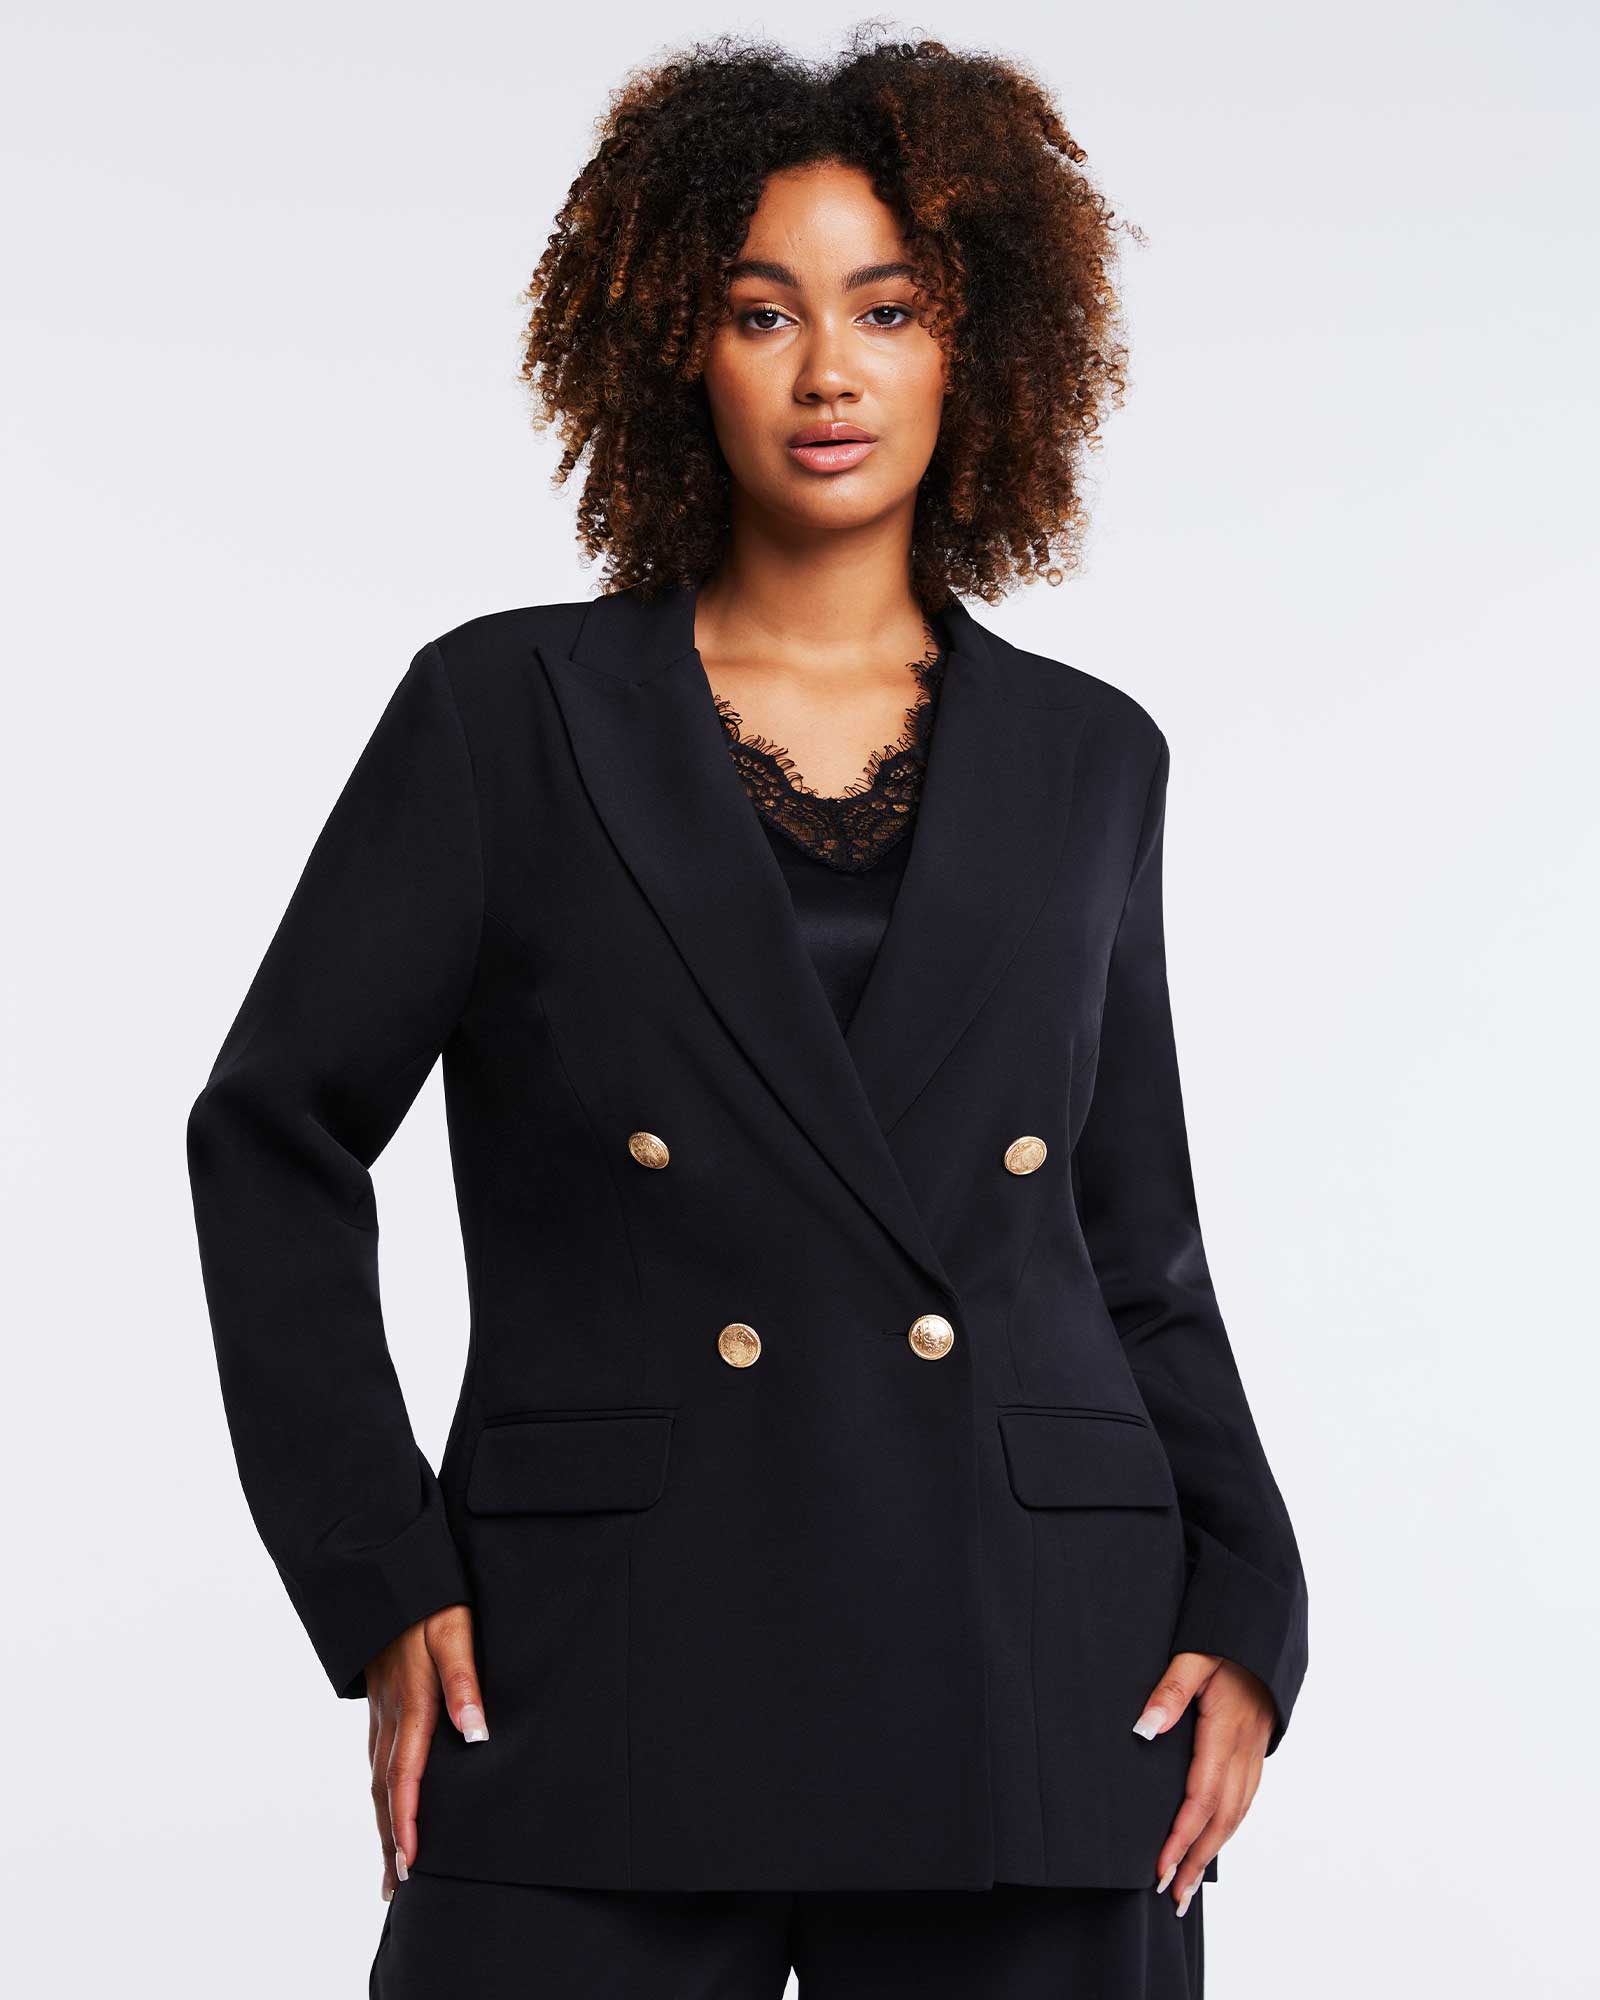 A plus-size woman wearing a Savannah Double-Breasted Black Blazer with gold buttons.